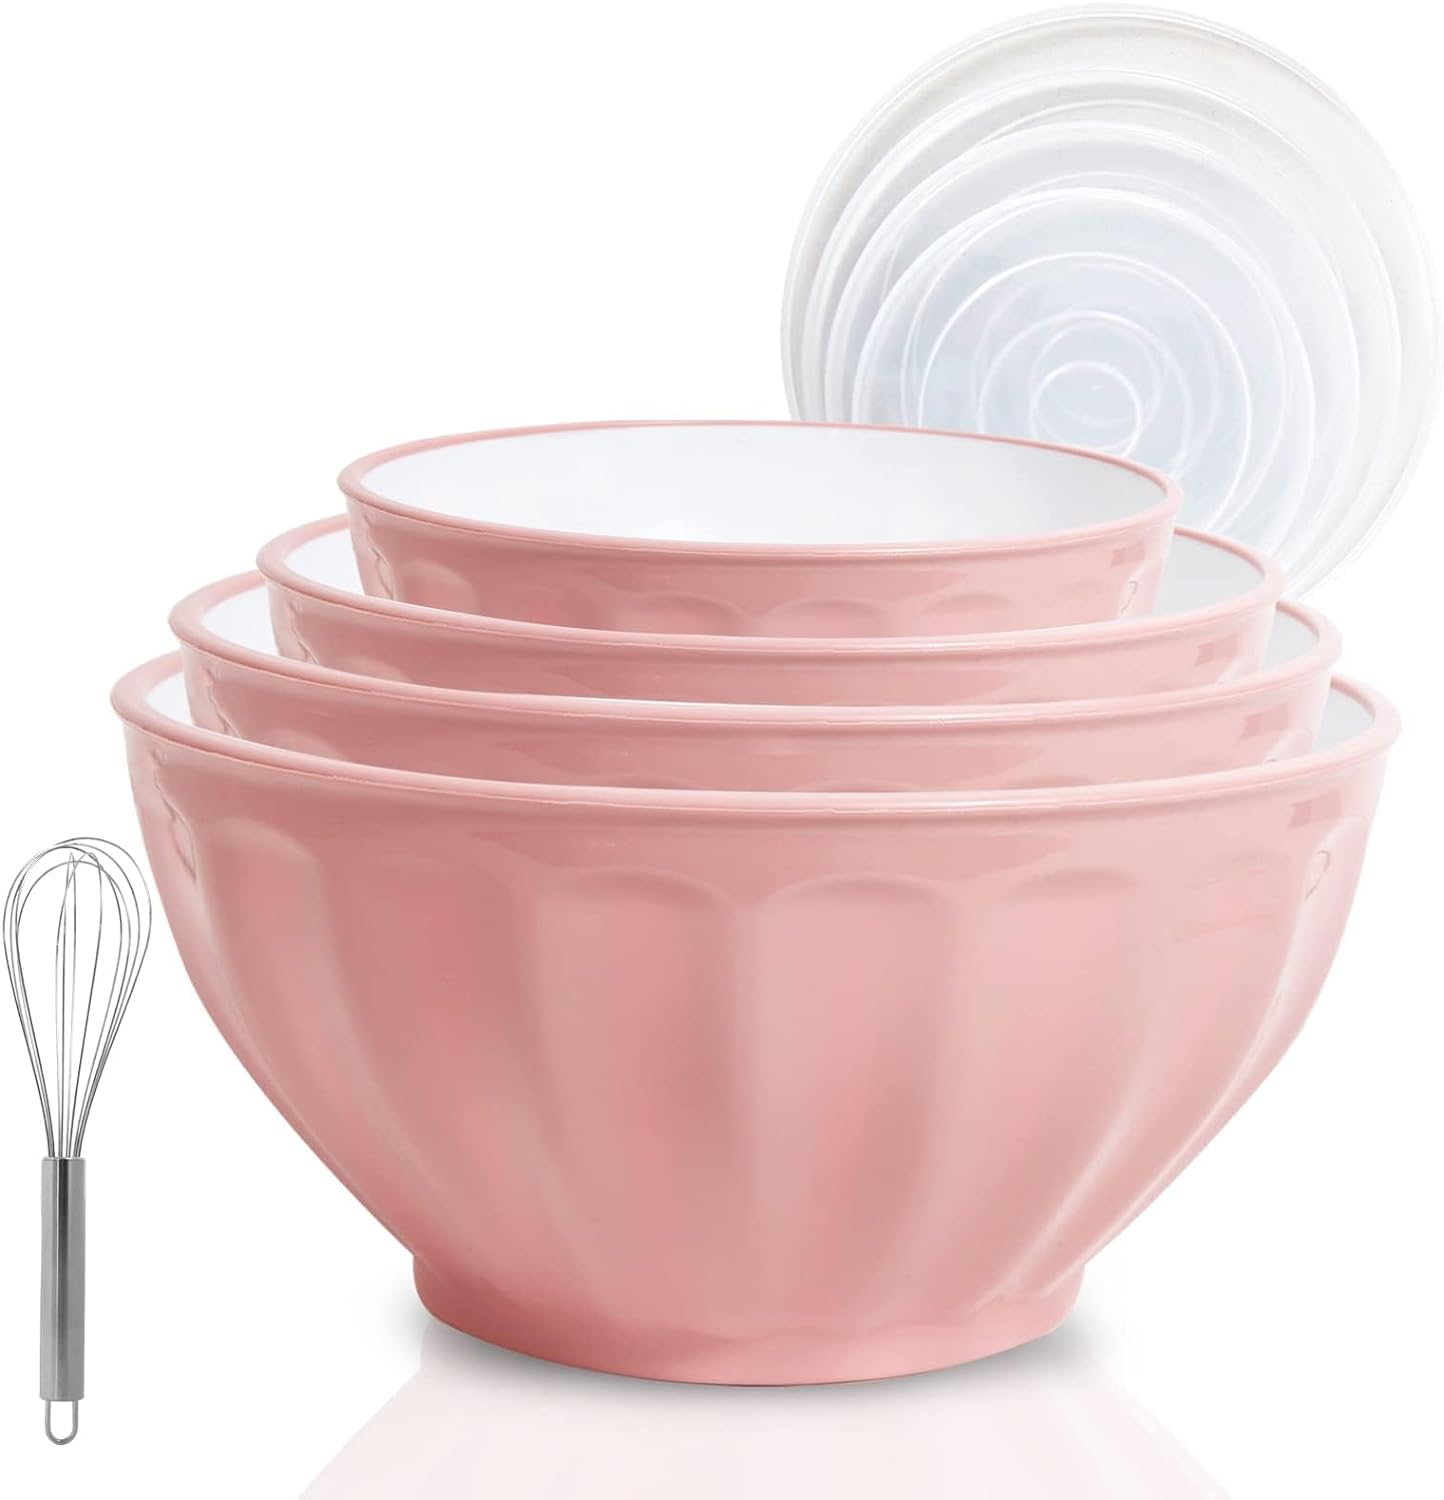 JCXivan Mixing Bowls with Lids Set,4 Piece Large Plastic Nesting Mixing Bowls,Includes 4 Microwave safe Mixing Bowl and An Egg Whisk for Kitchen Prepping,Baking,Cooking Food, Pink